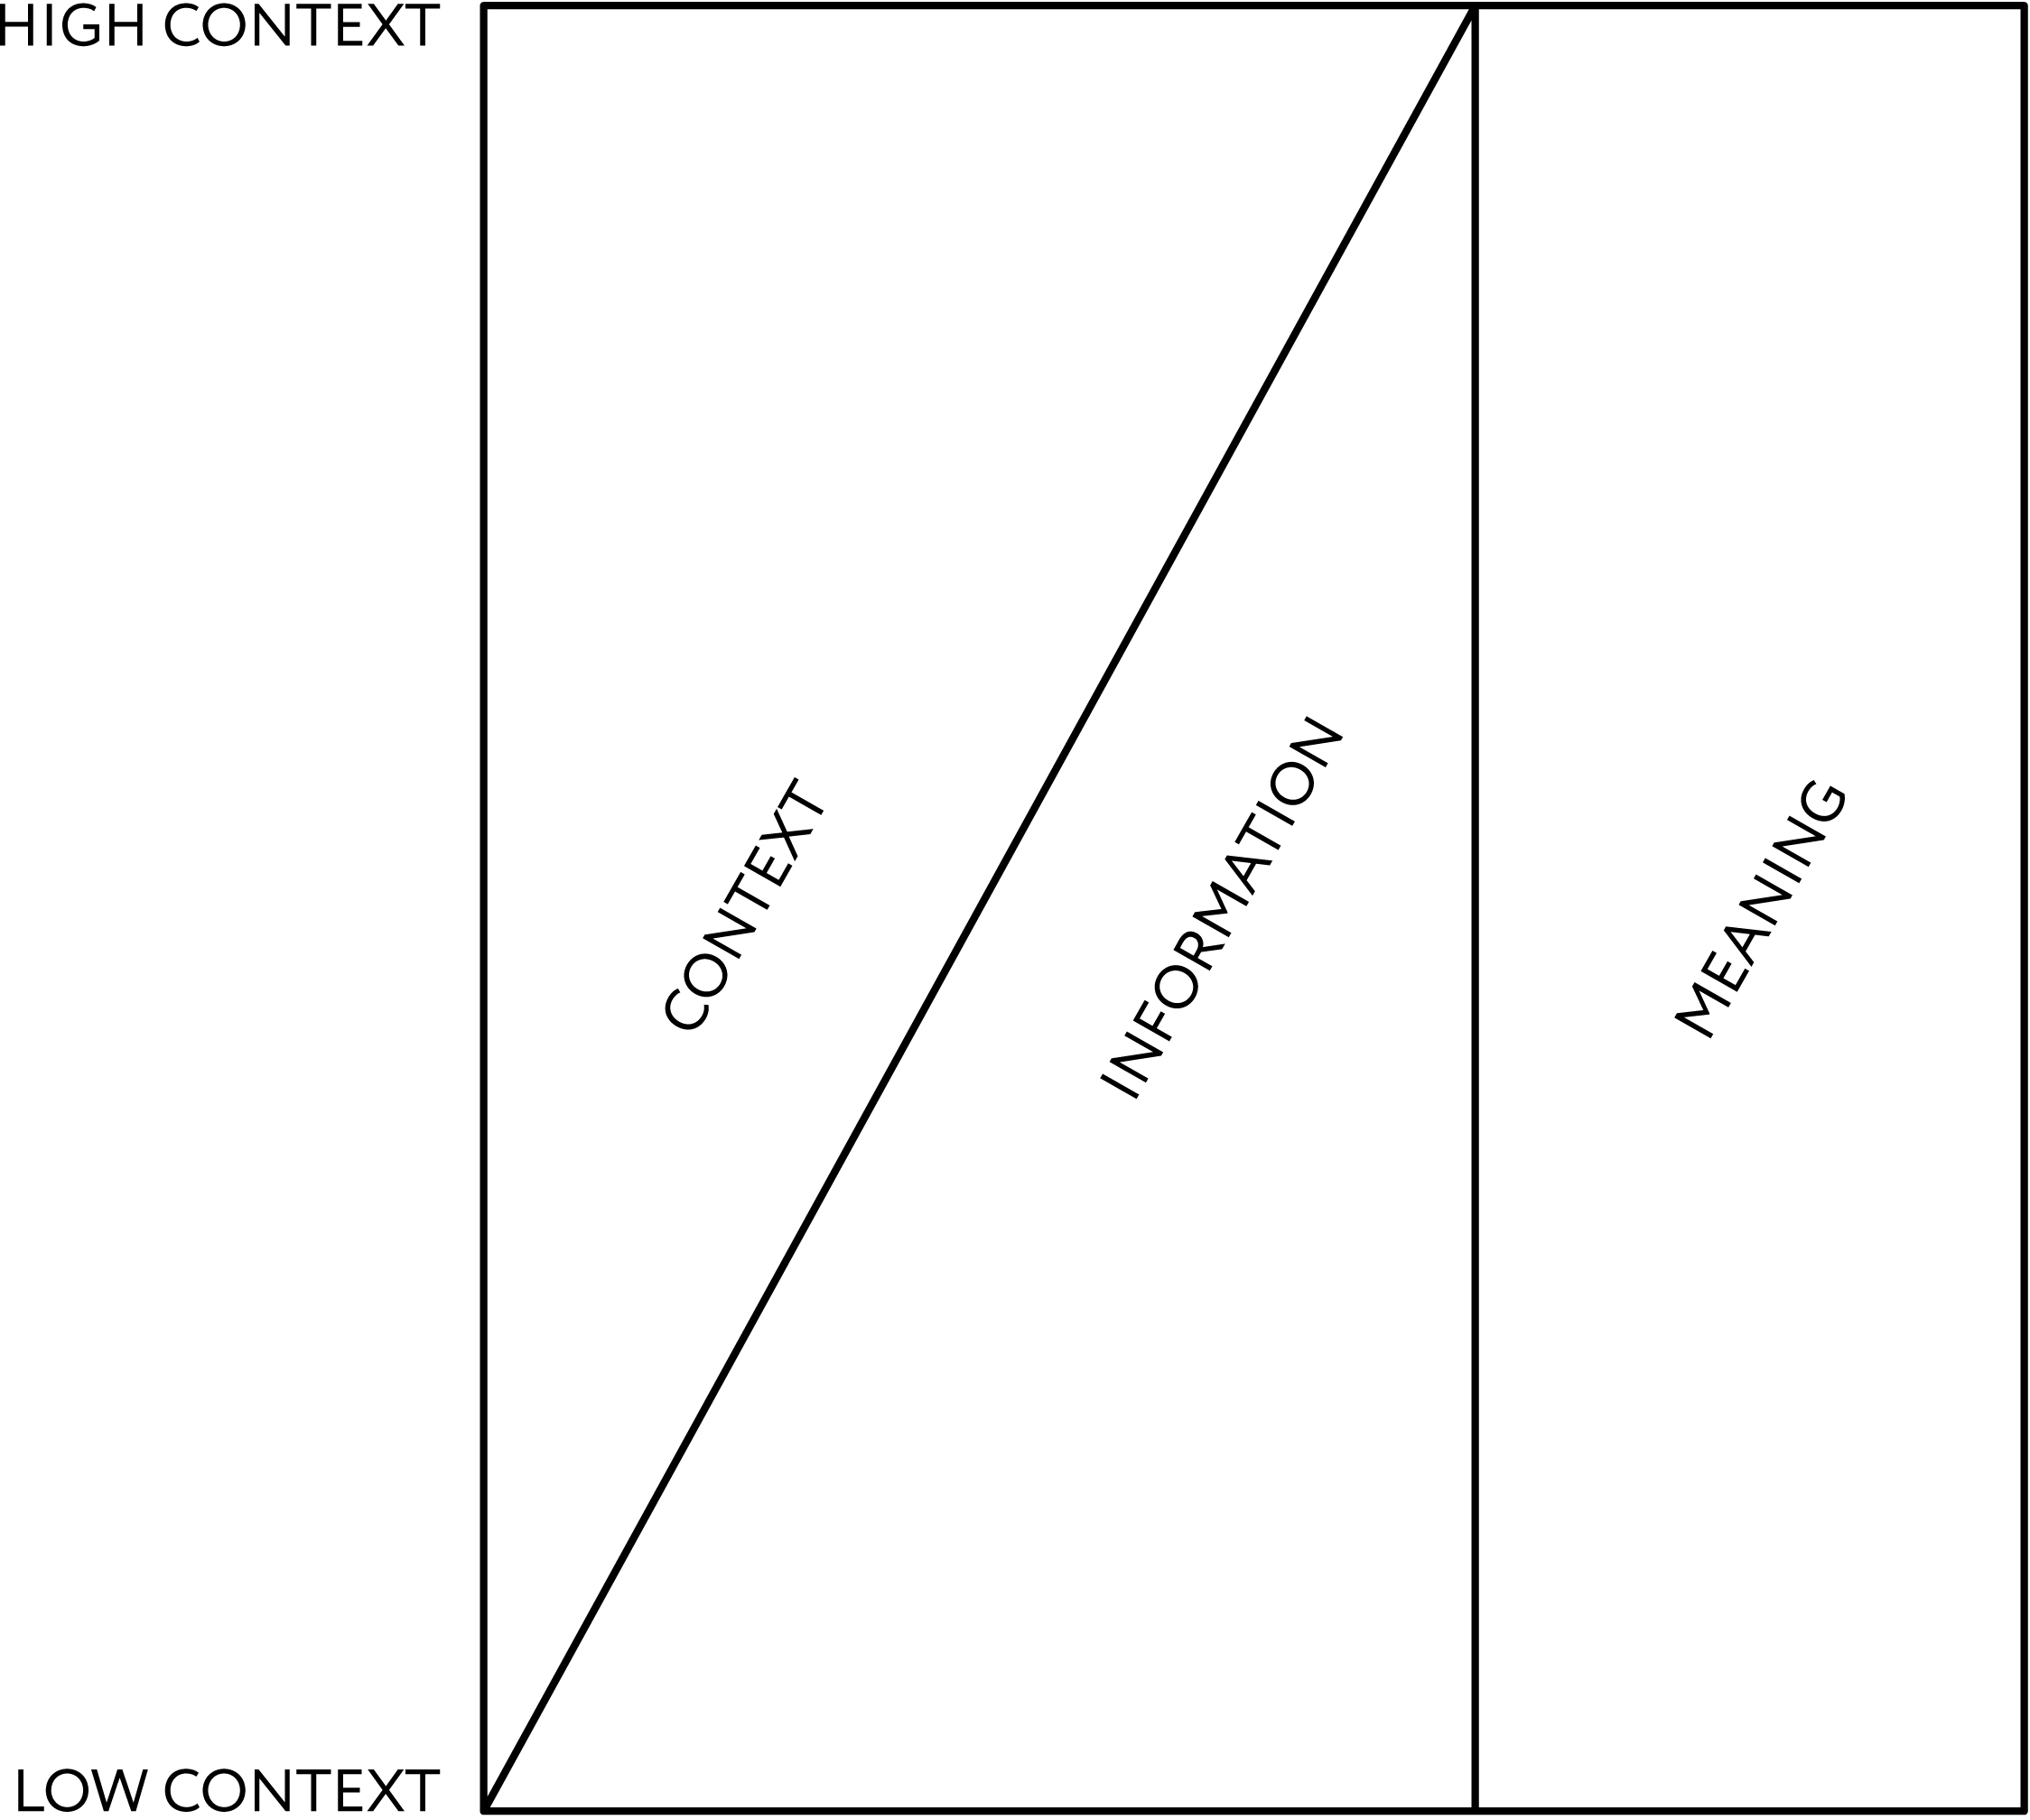 From “Beyond Culture”: The different structures by which high-context and low-context cultures communicate